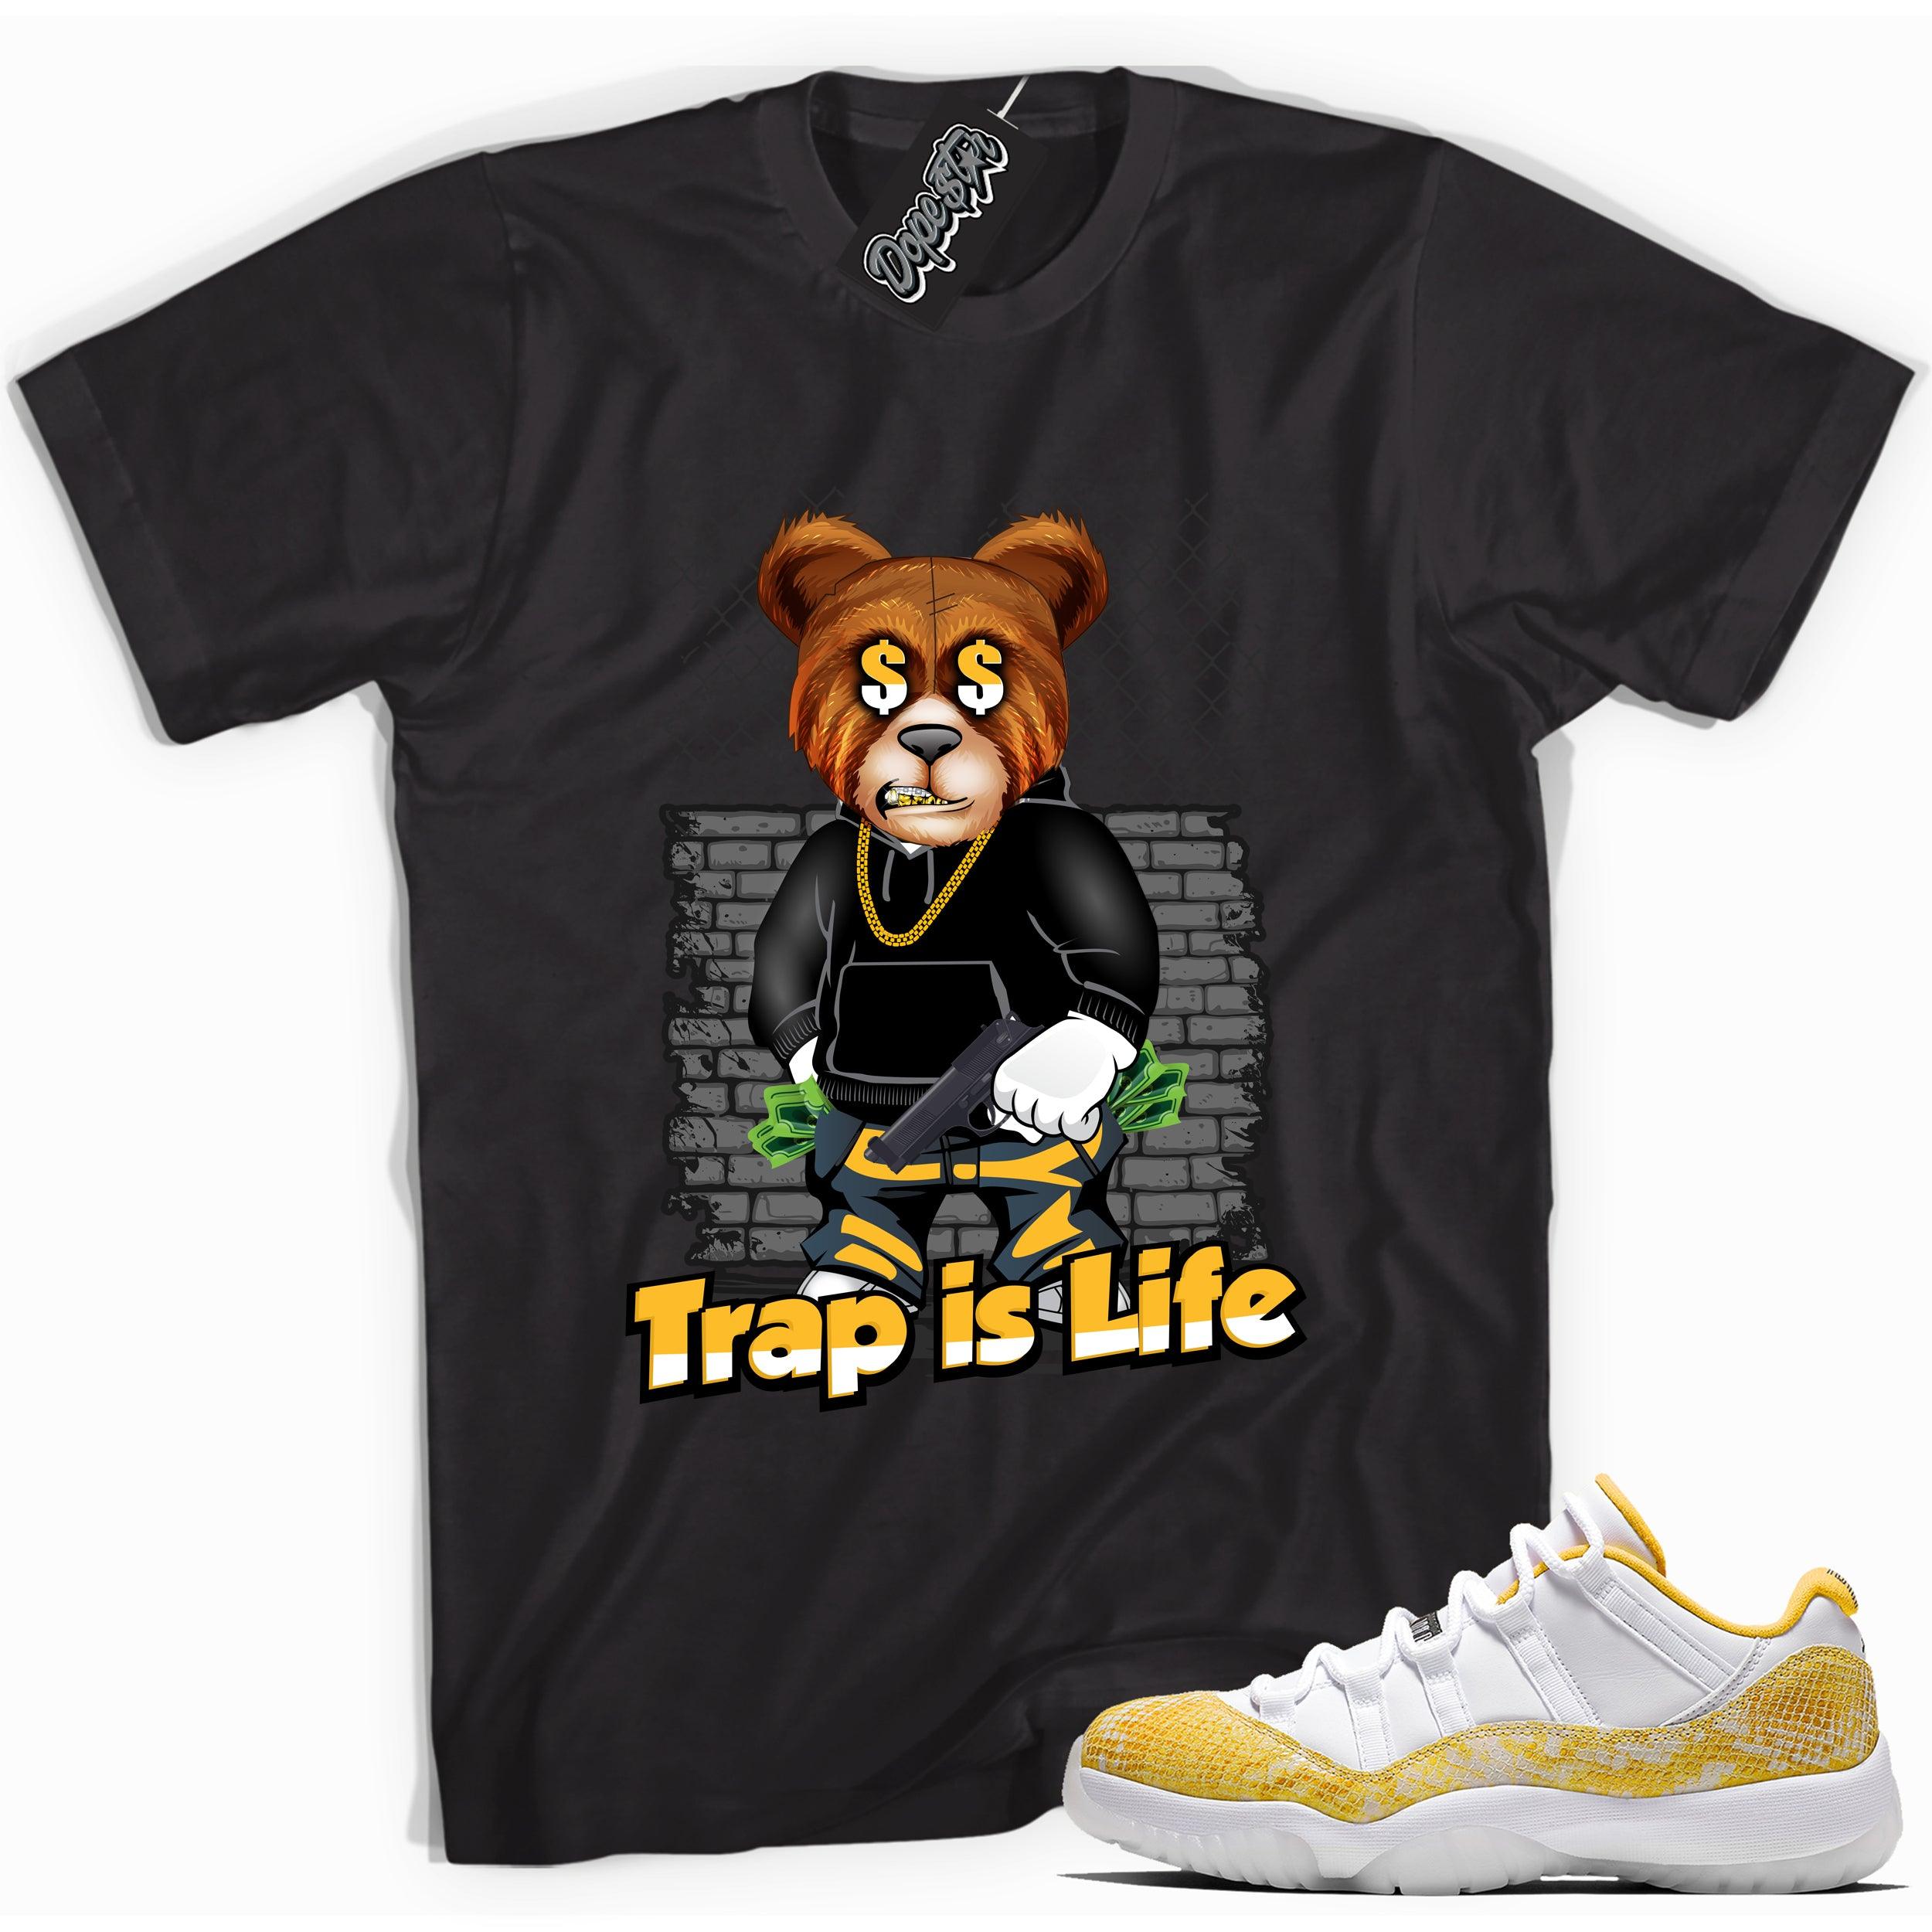 Cool black graphic tee with 'trap is life' print, that perfectly matches  Air Jordan 11 Retro Low Yellow Snakeskin sneakers